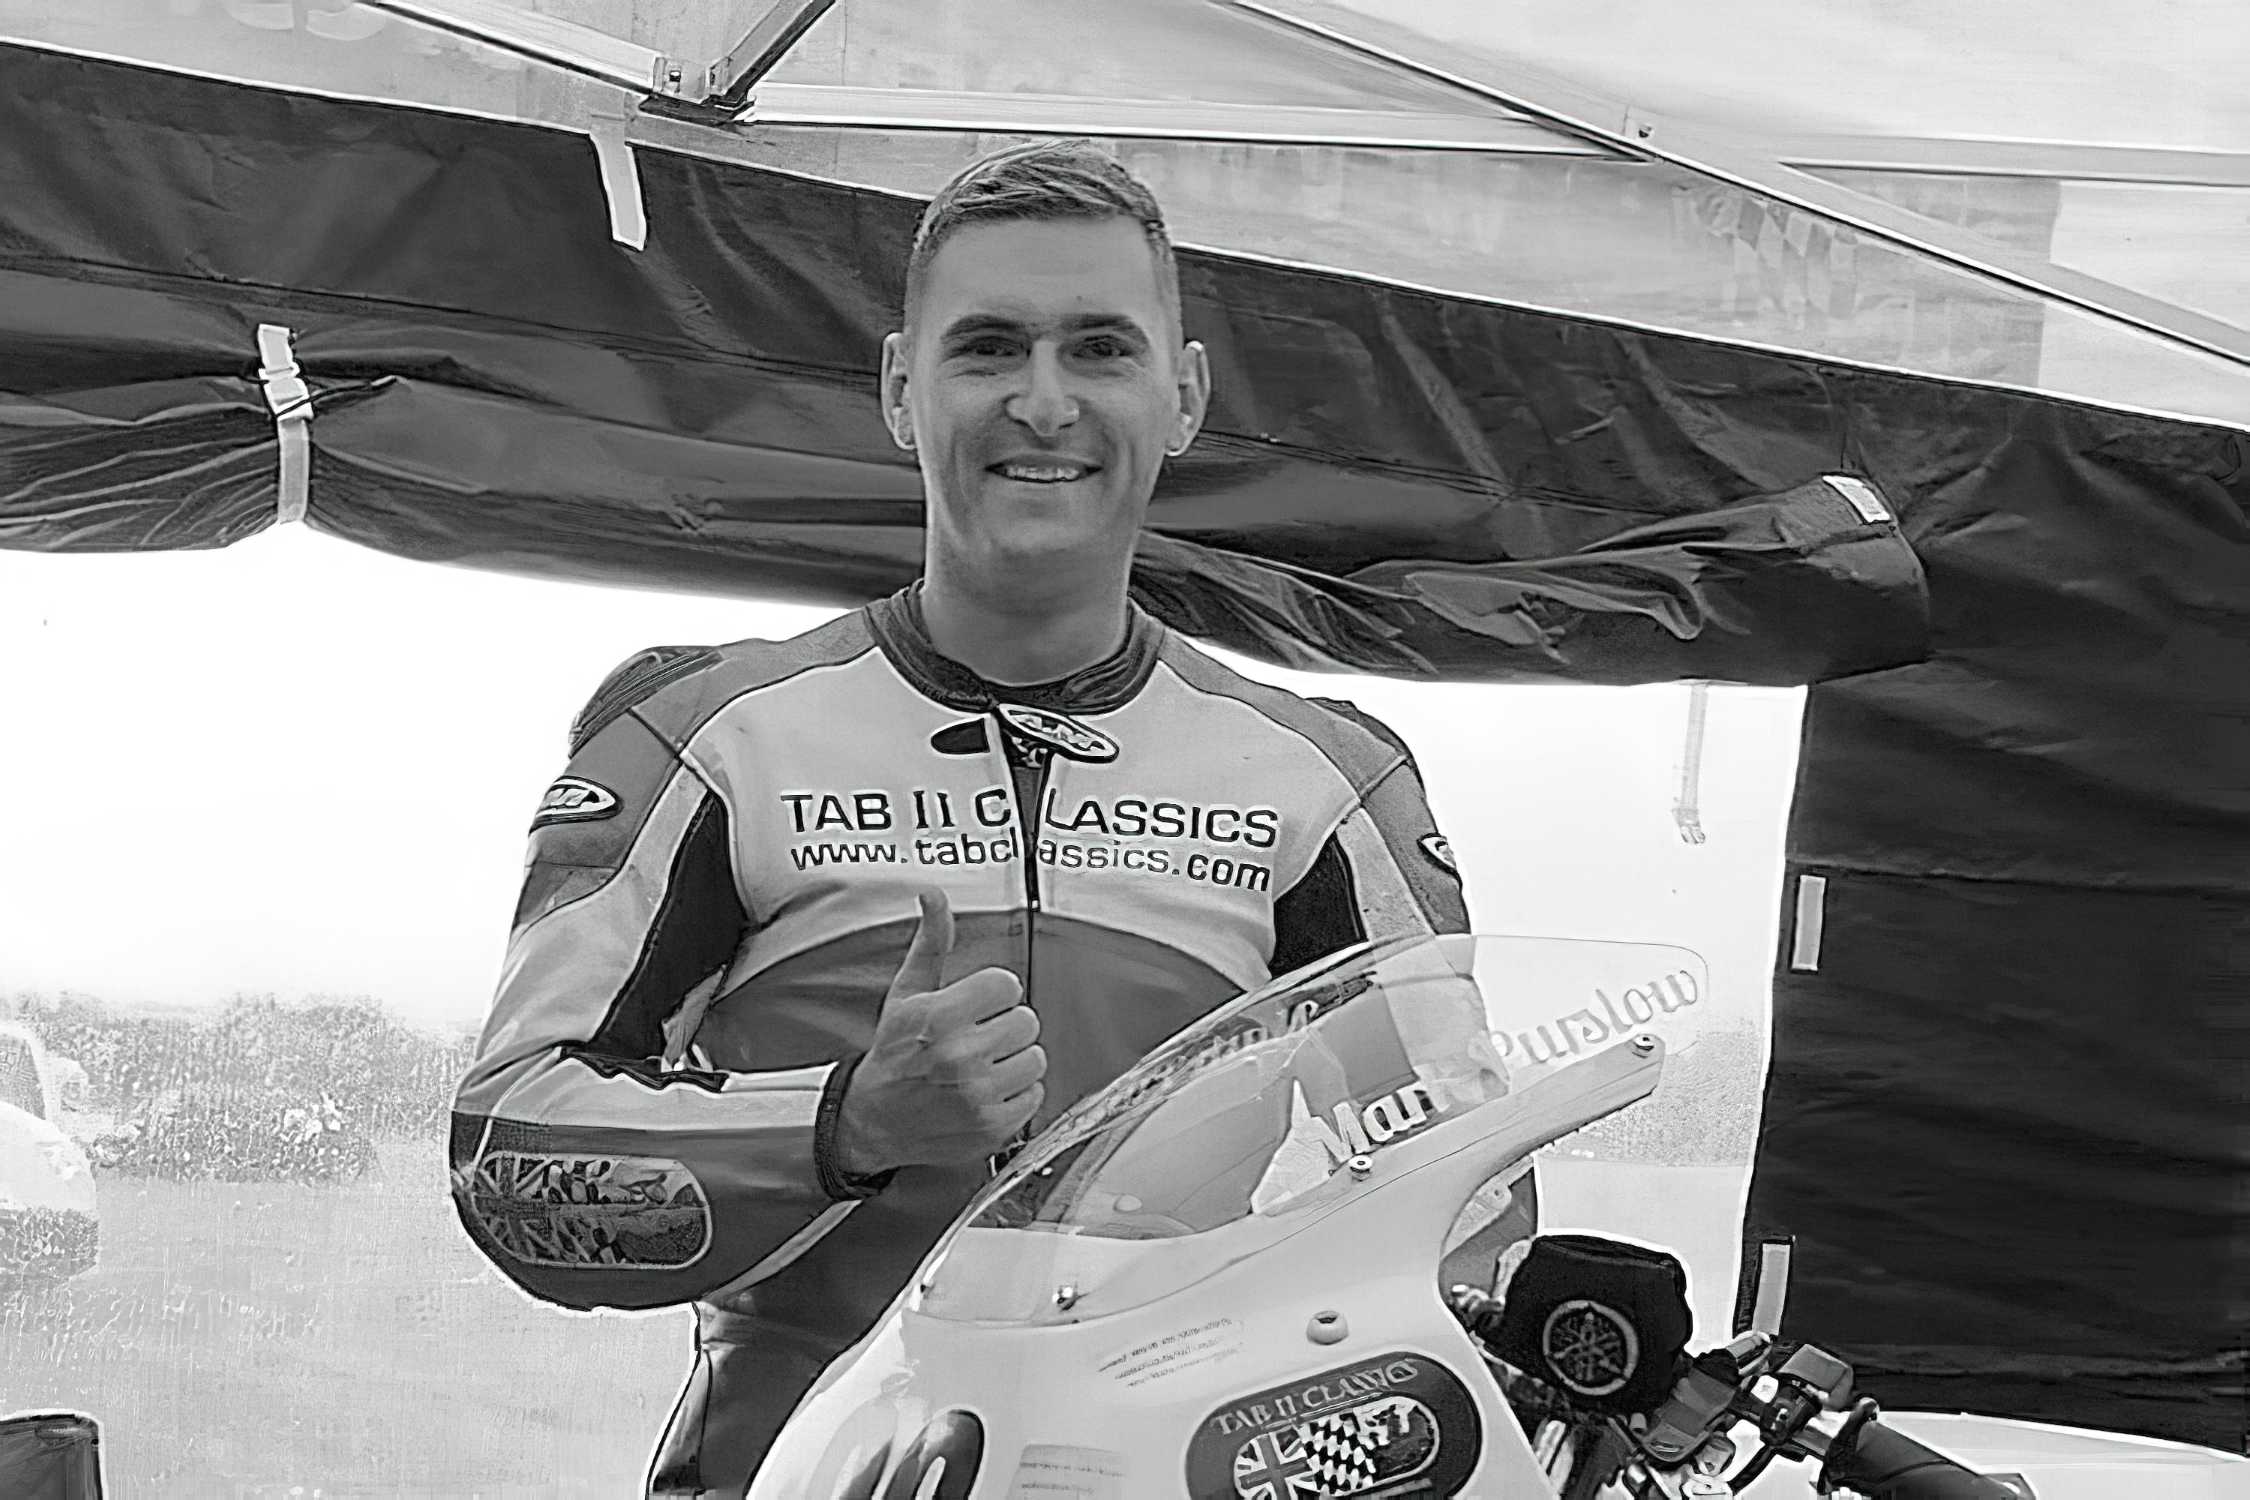 Mark Purslow crashed during practice for Isle of Man TT - MOTORCYCLES.NEWS